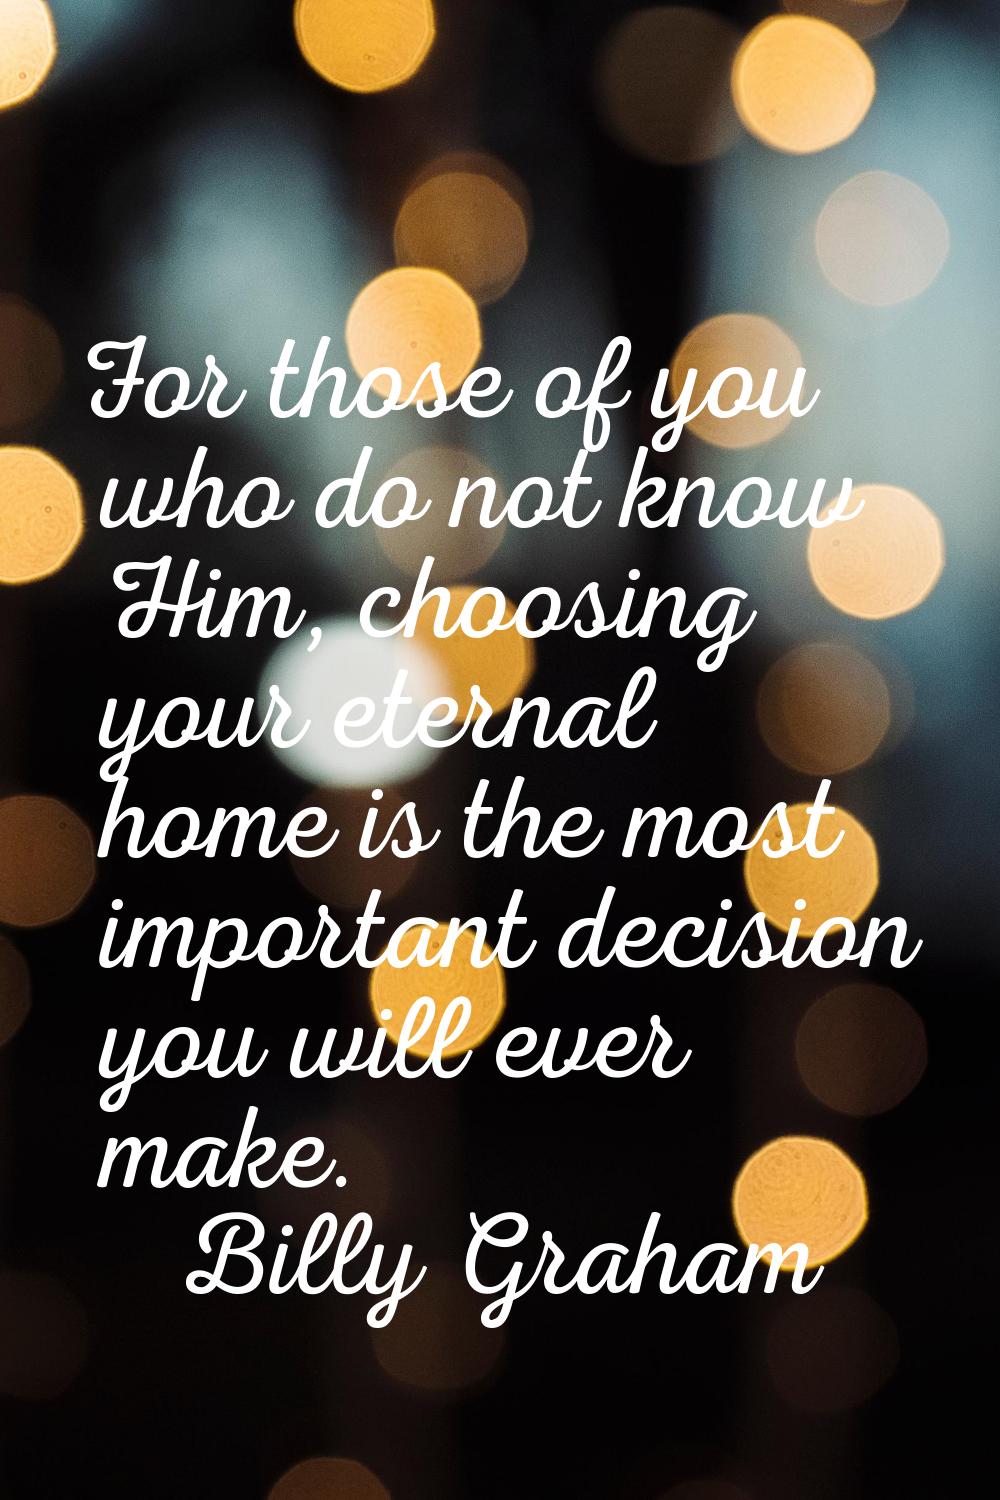 For those of you who do not know Him, choosing your eternal home is the most important decision you